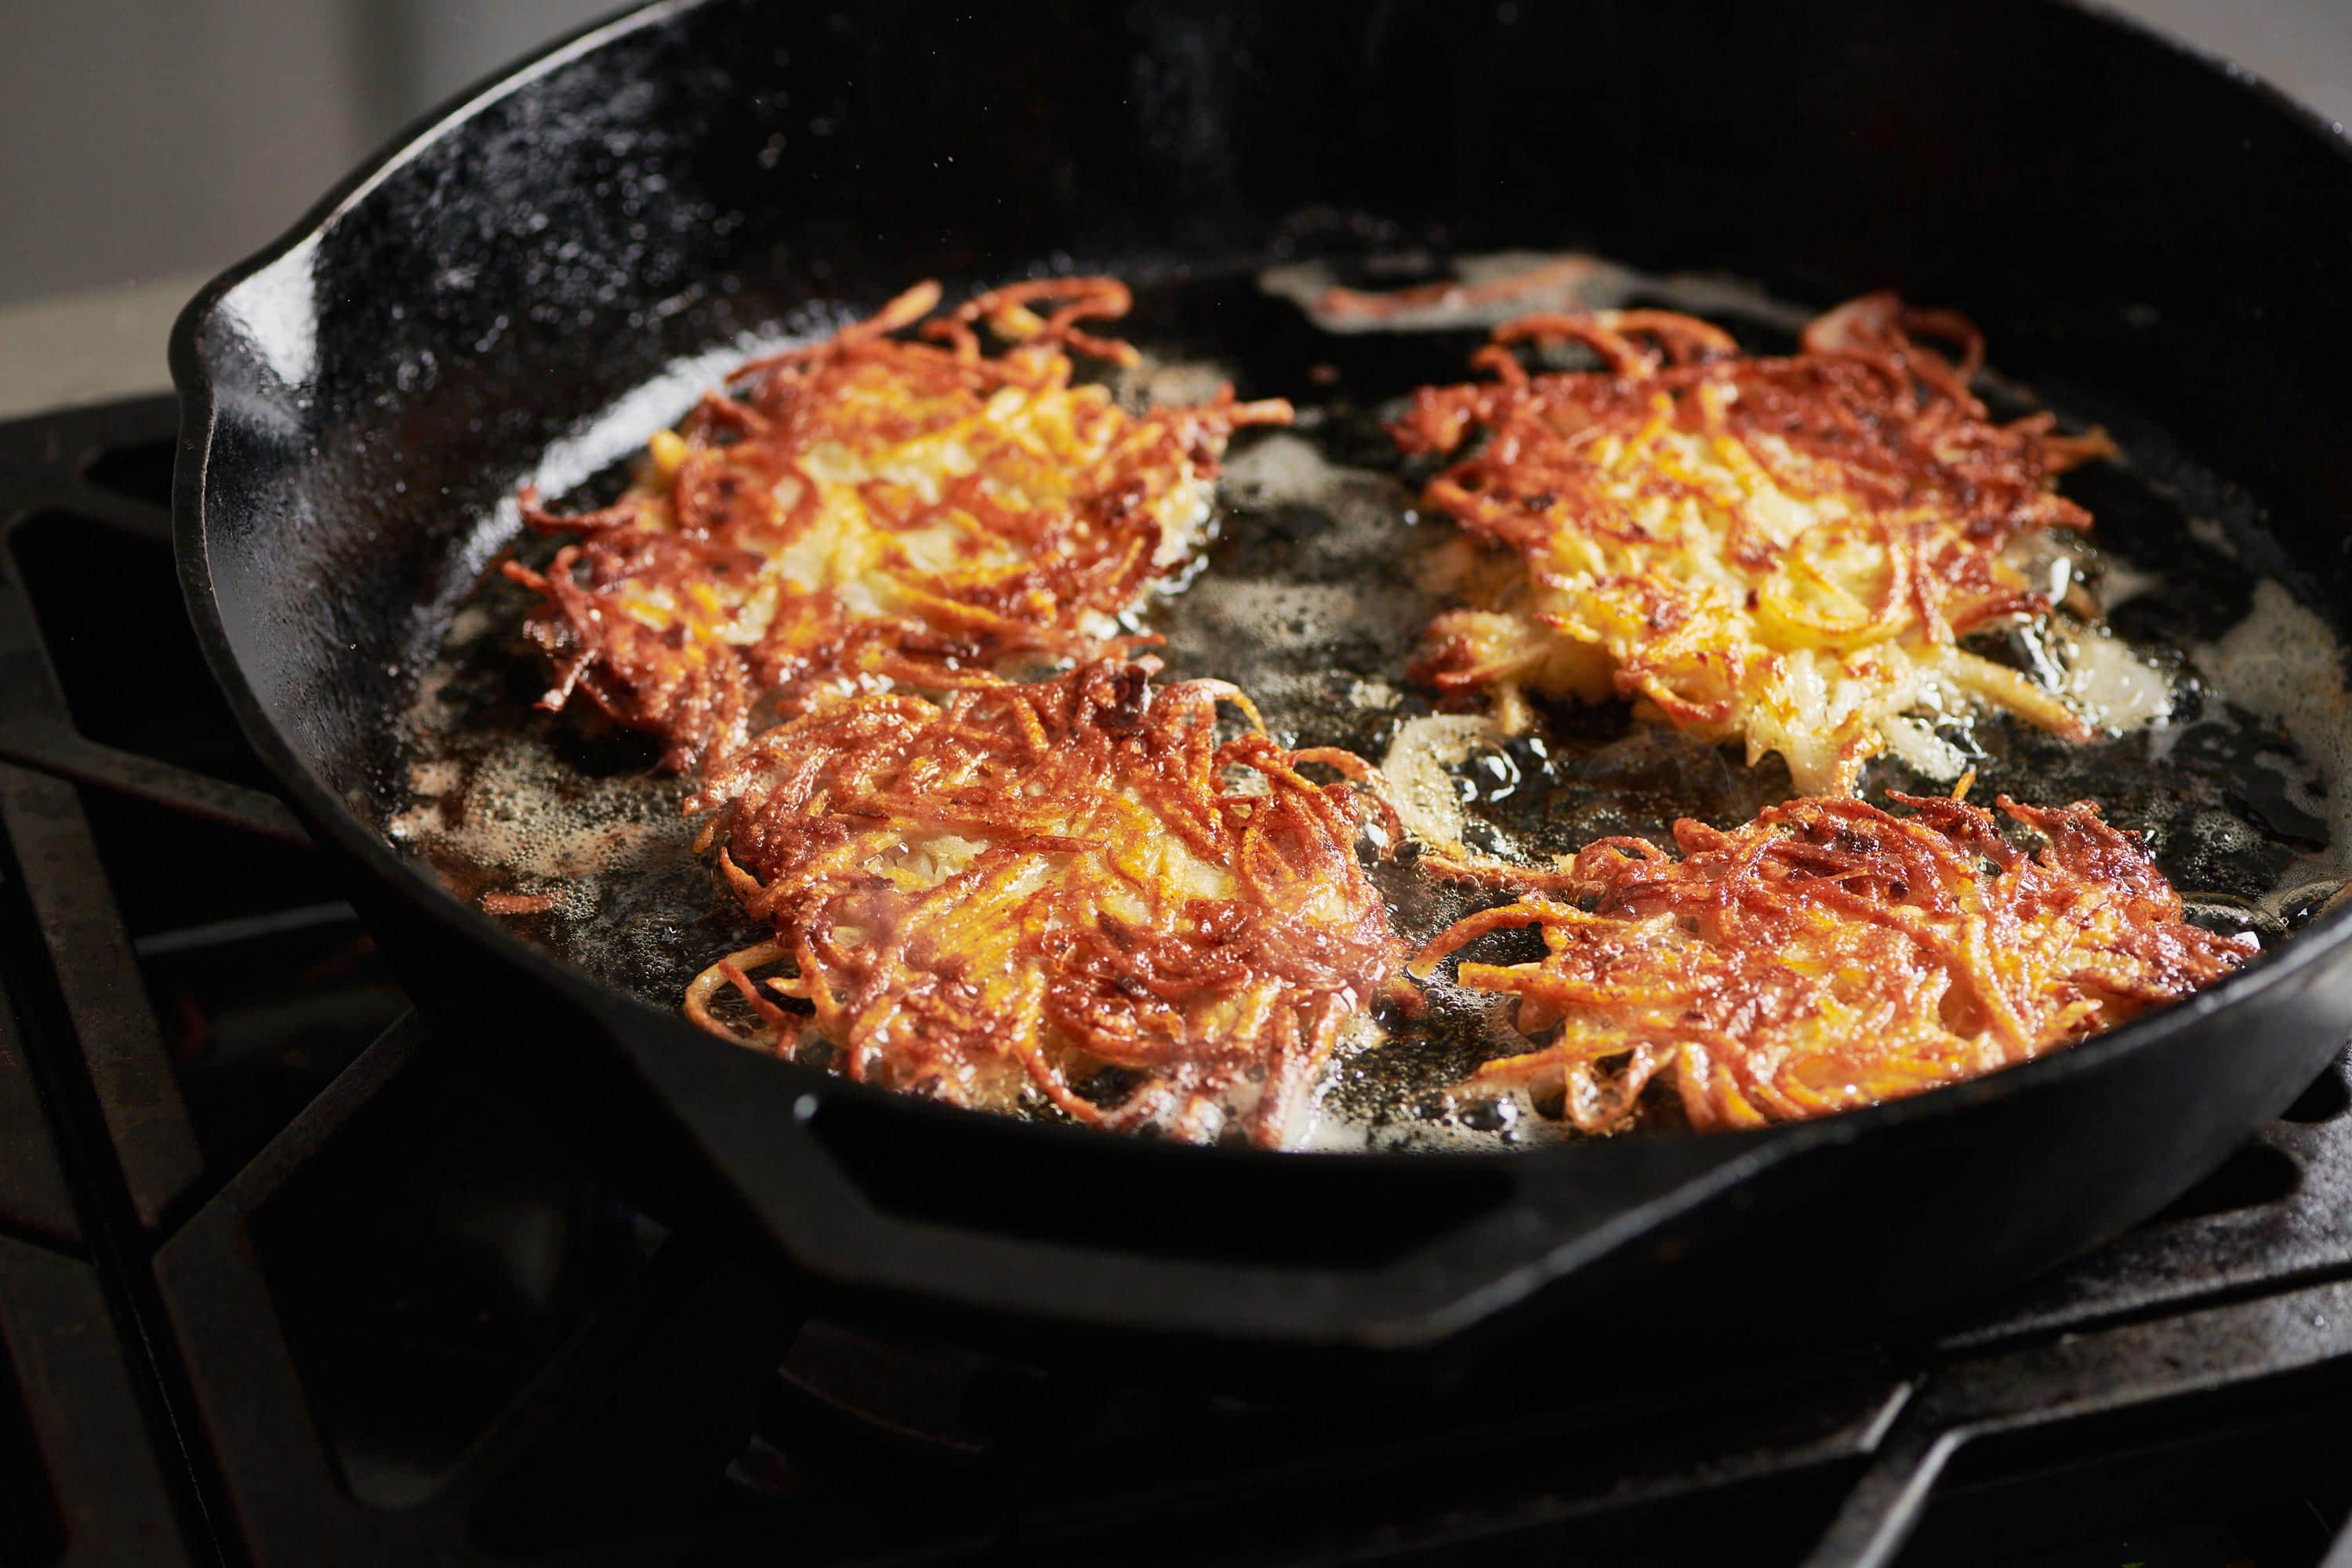 Four latkes frying in a skillet.